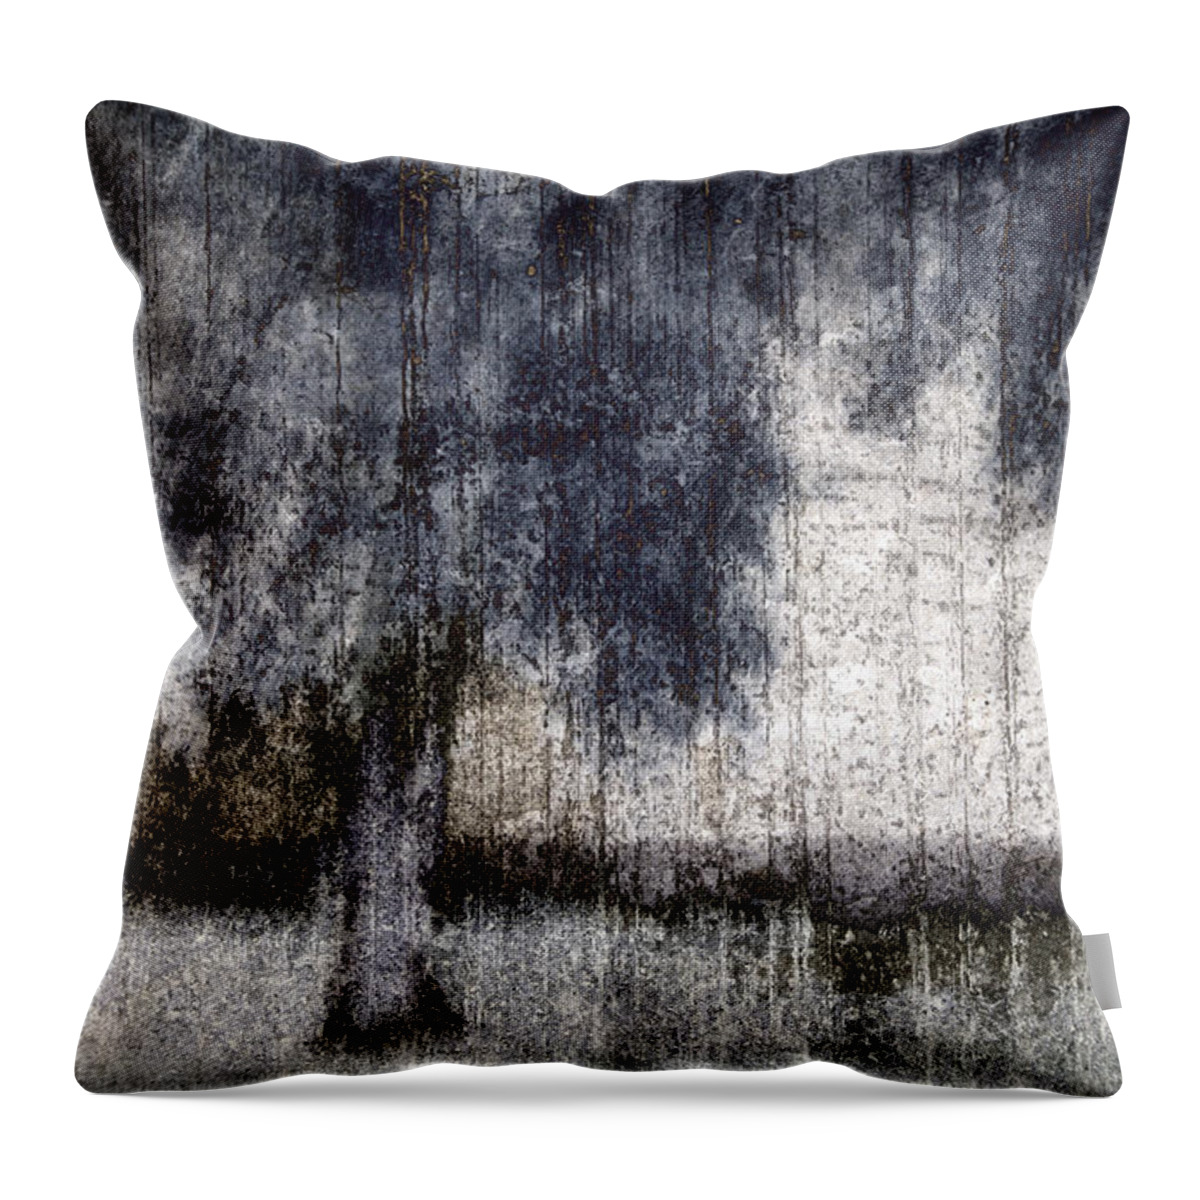 Tree Throw Pillow featuring the photograph Tree Through Sheer Curtains by Carol Leigh